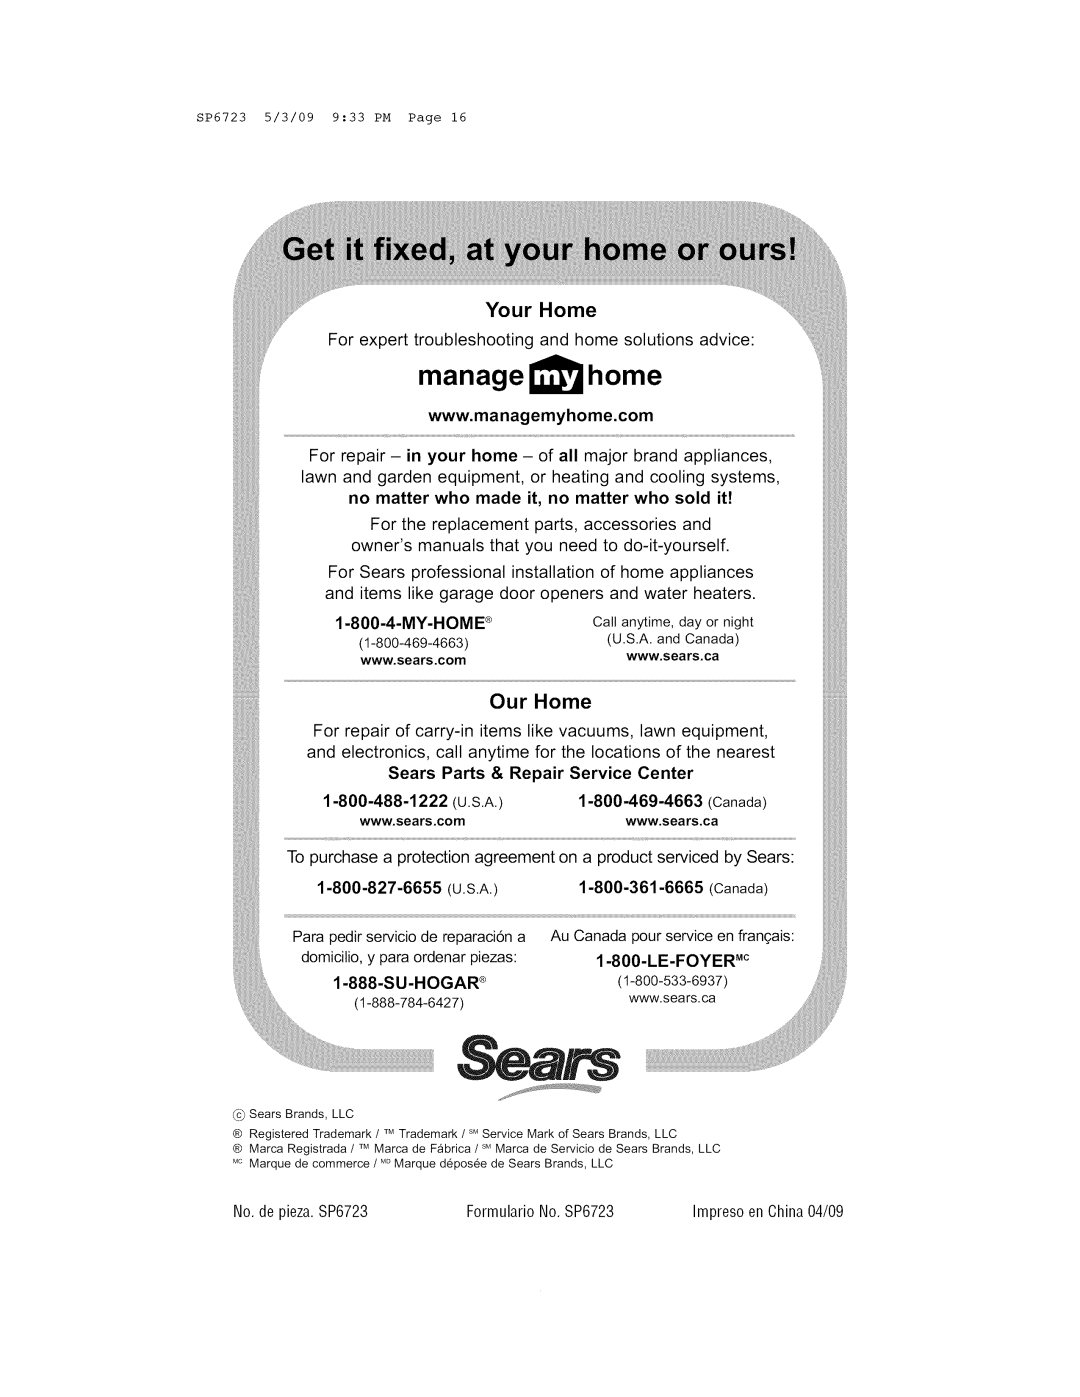 Univex 113.171500 manage home, Your Home, Our Home, My-Home, Sears Parts & Repair Service Center, Canada, LE-FOYER Mc 